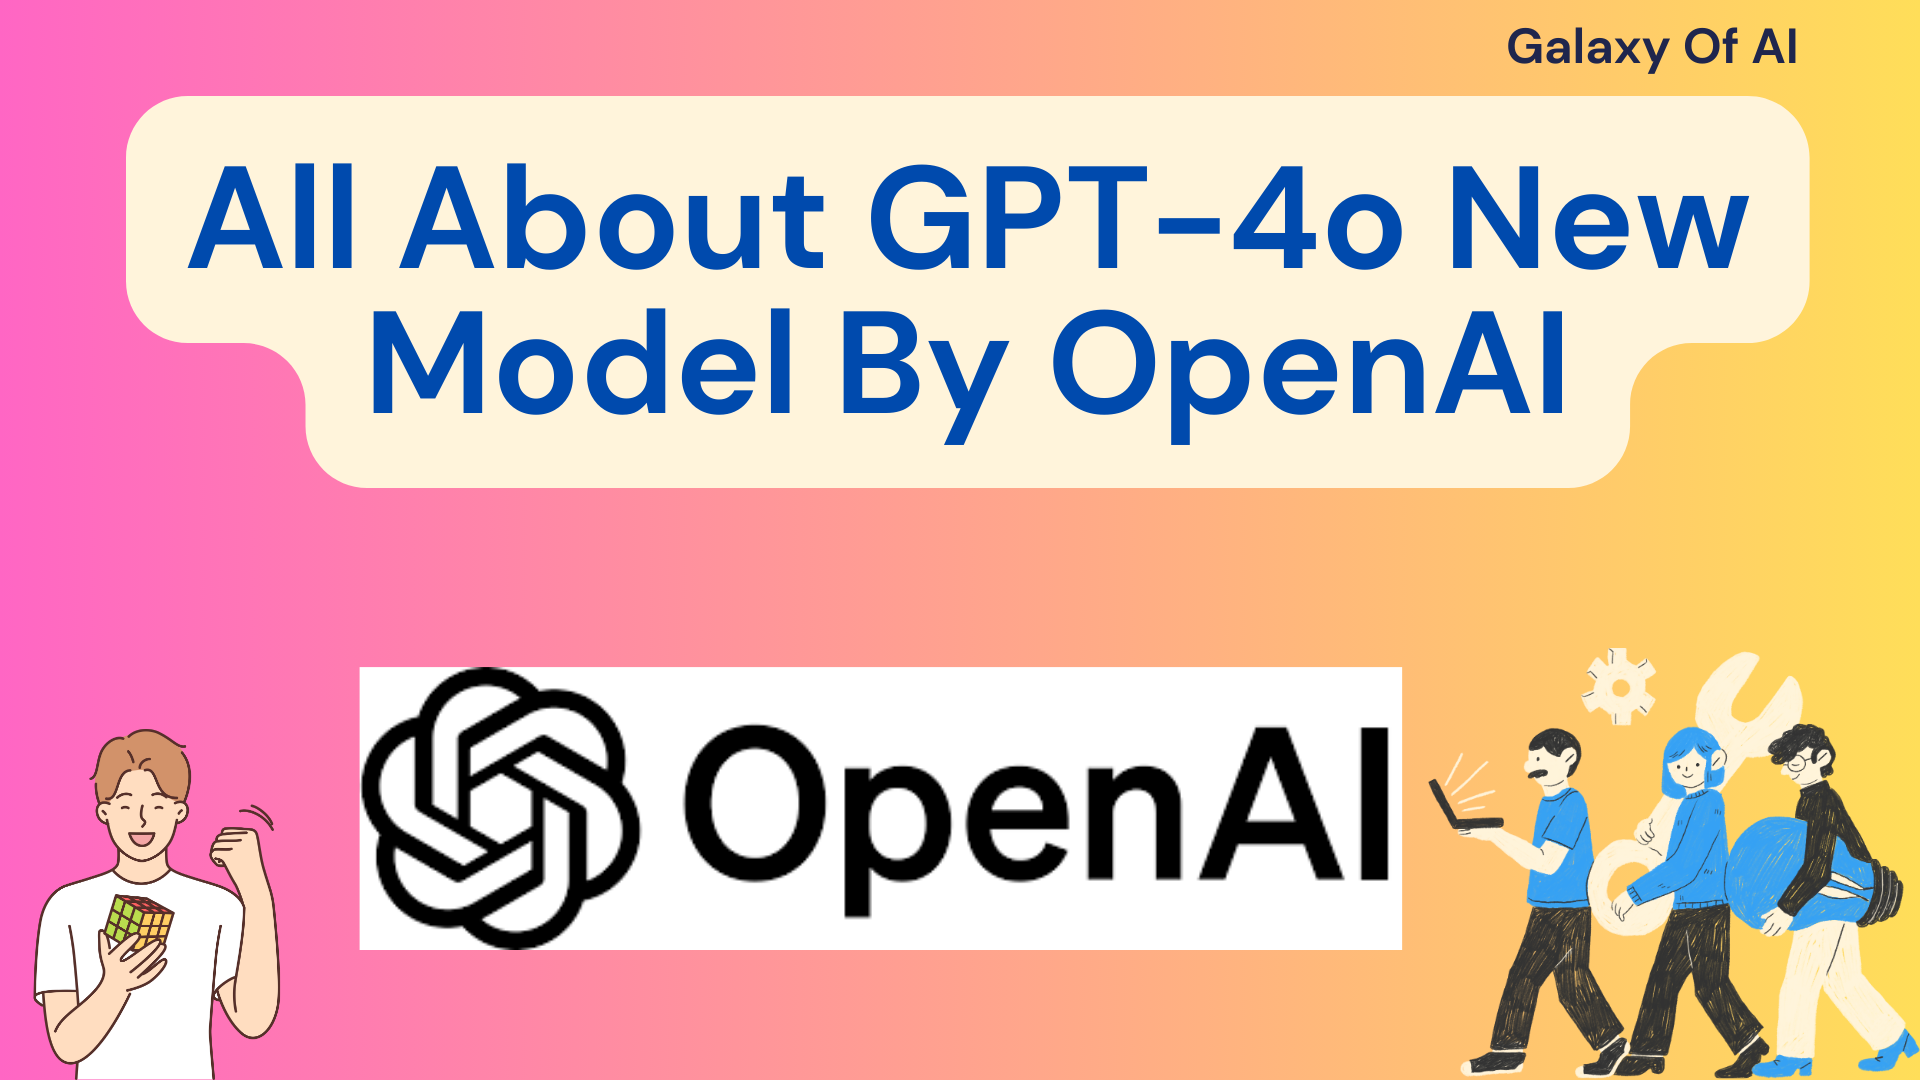 All About GPT-4o New Model By OpenAI